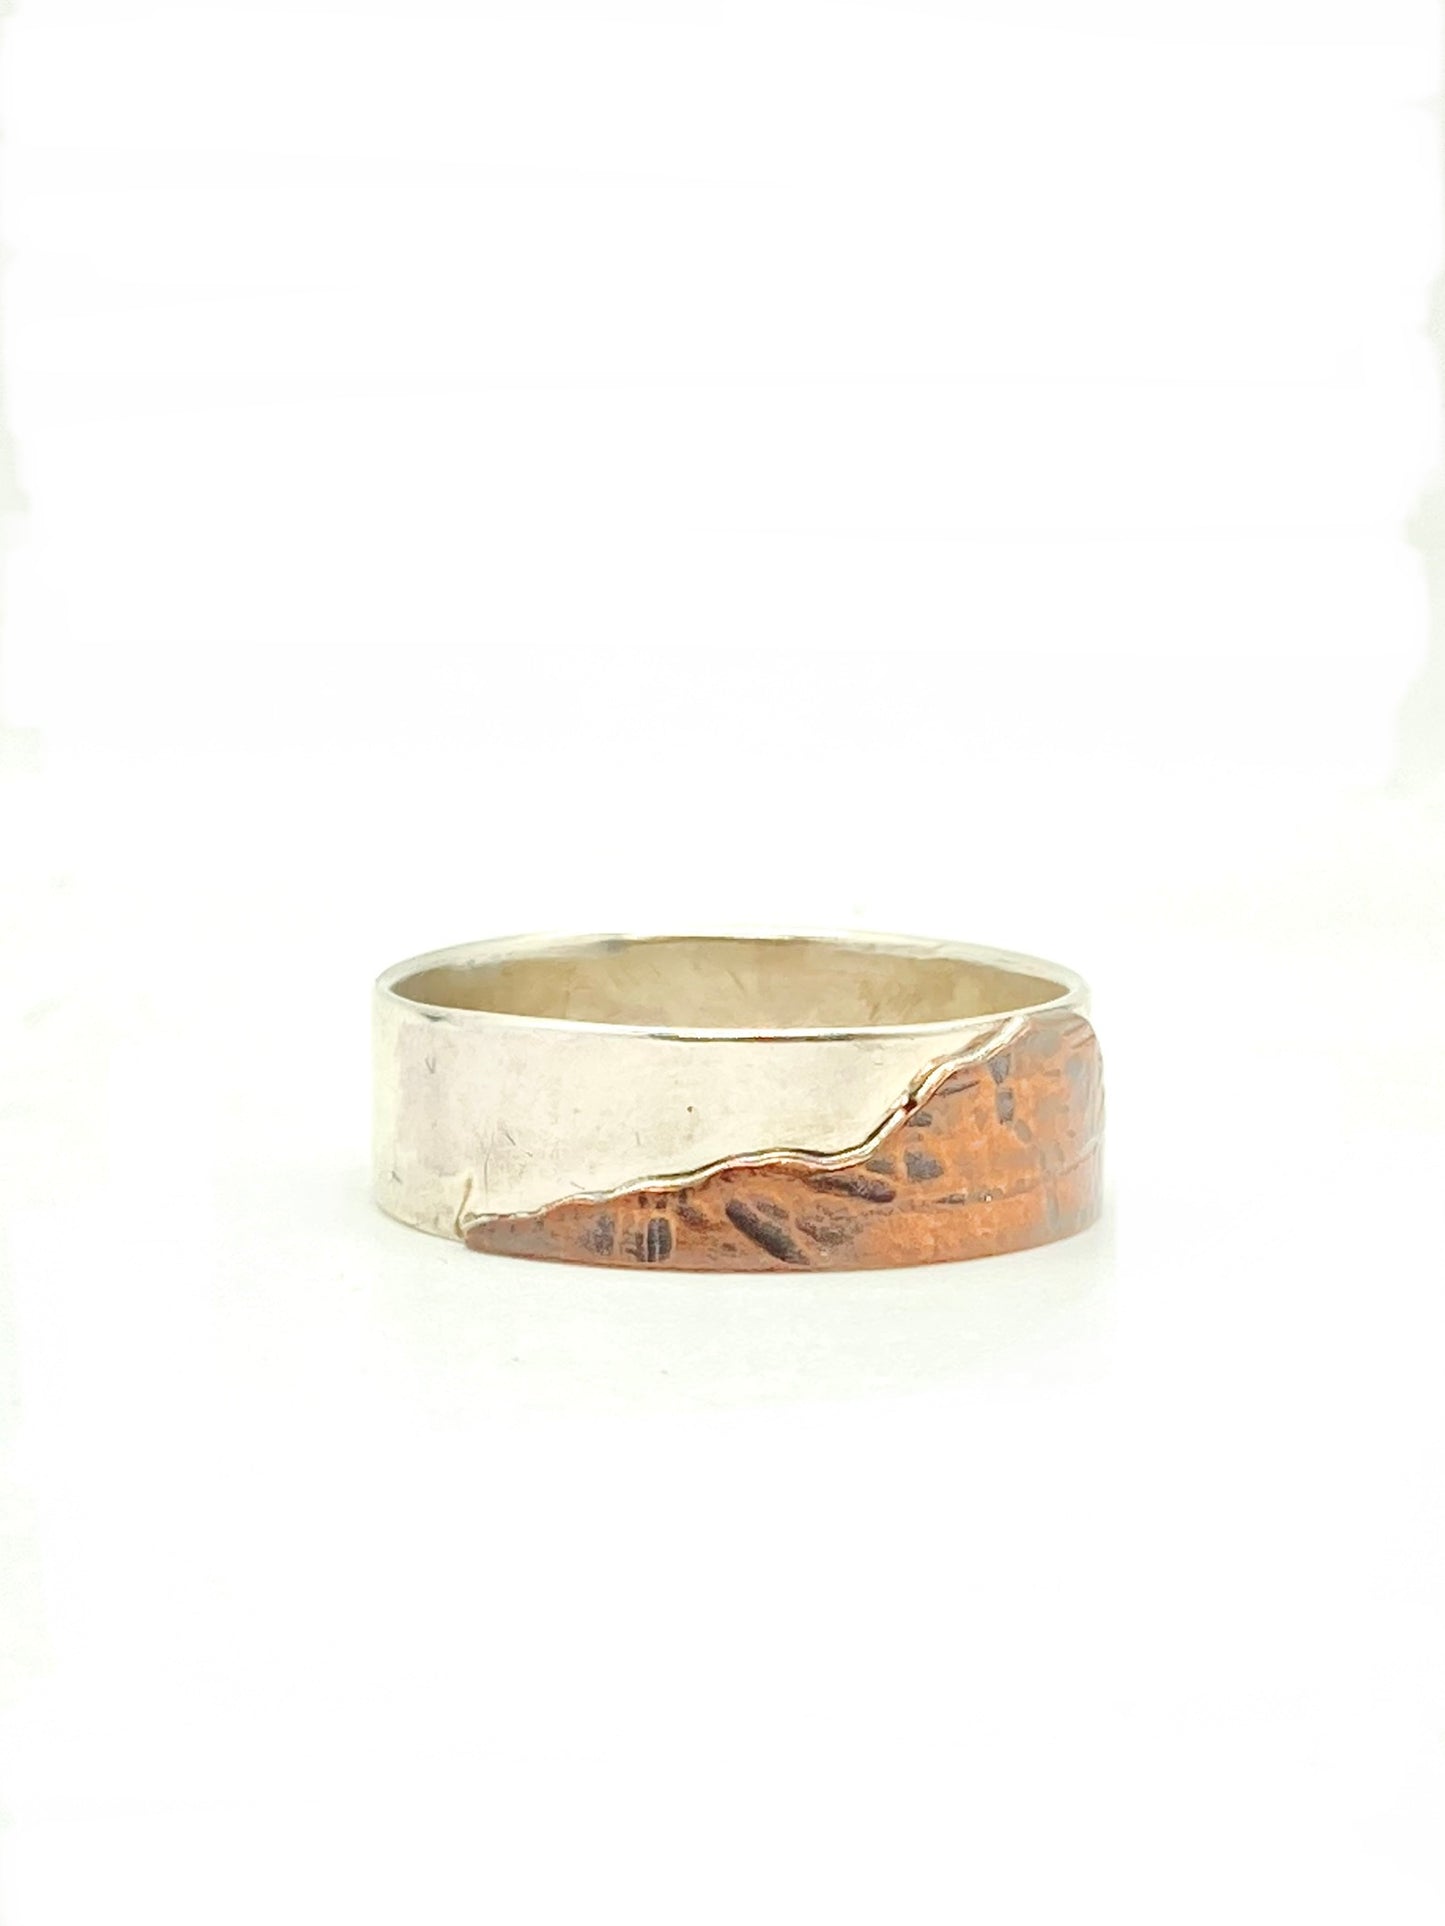 Thunder Mountain Ring in Sterling Silver and Copper, size 10.5